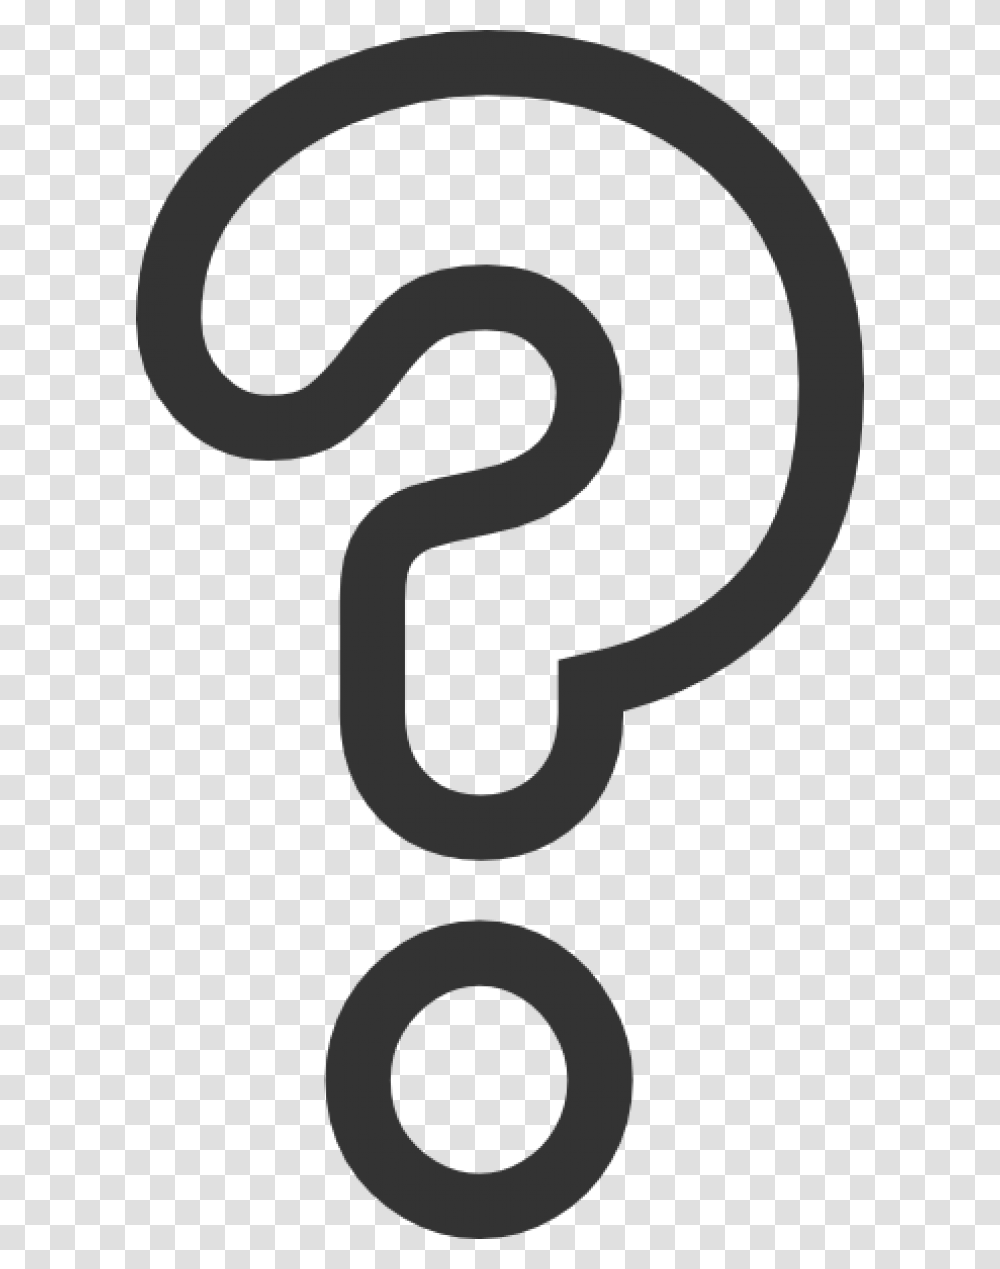 Free Question Mark Clipart Image With Translucent Question Mark Clipart, Alphabet, Number Transparent Png